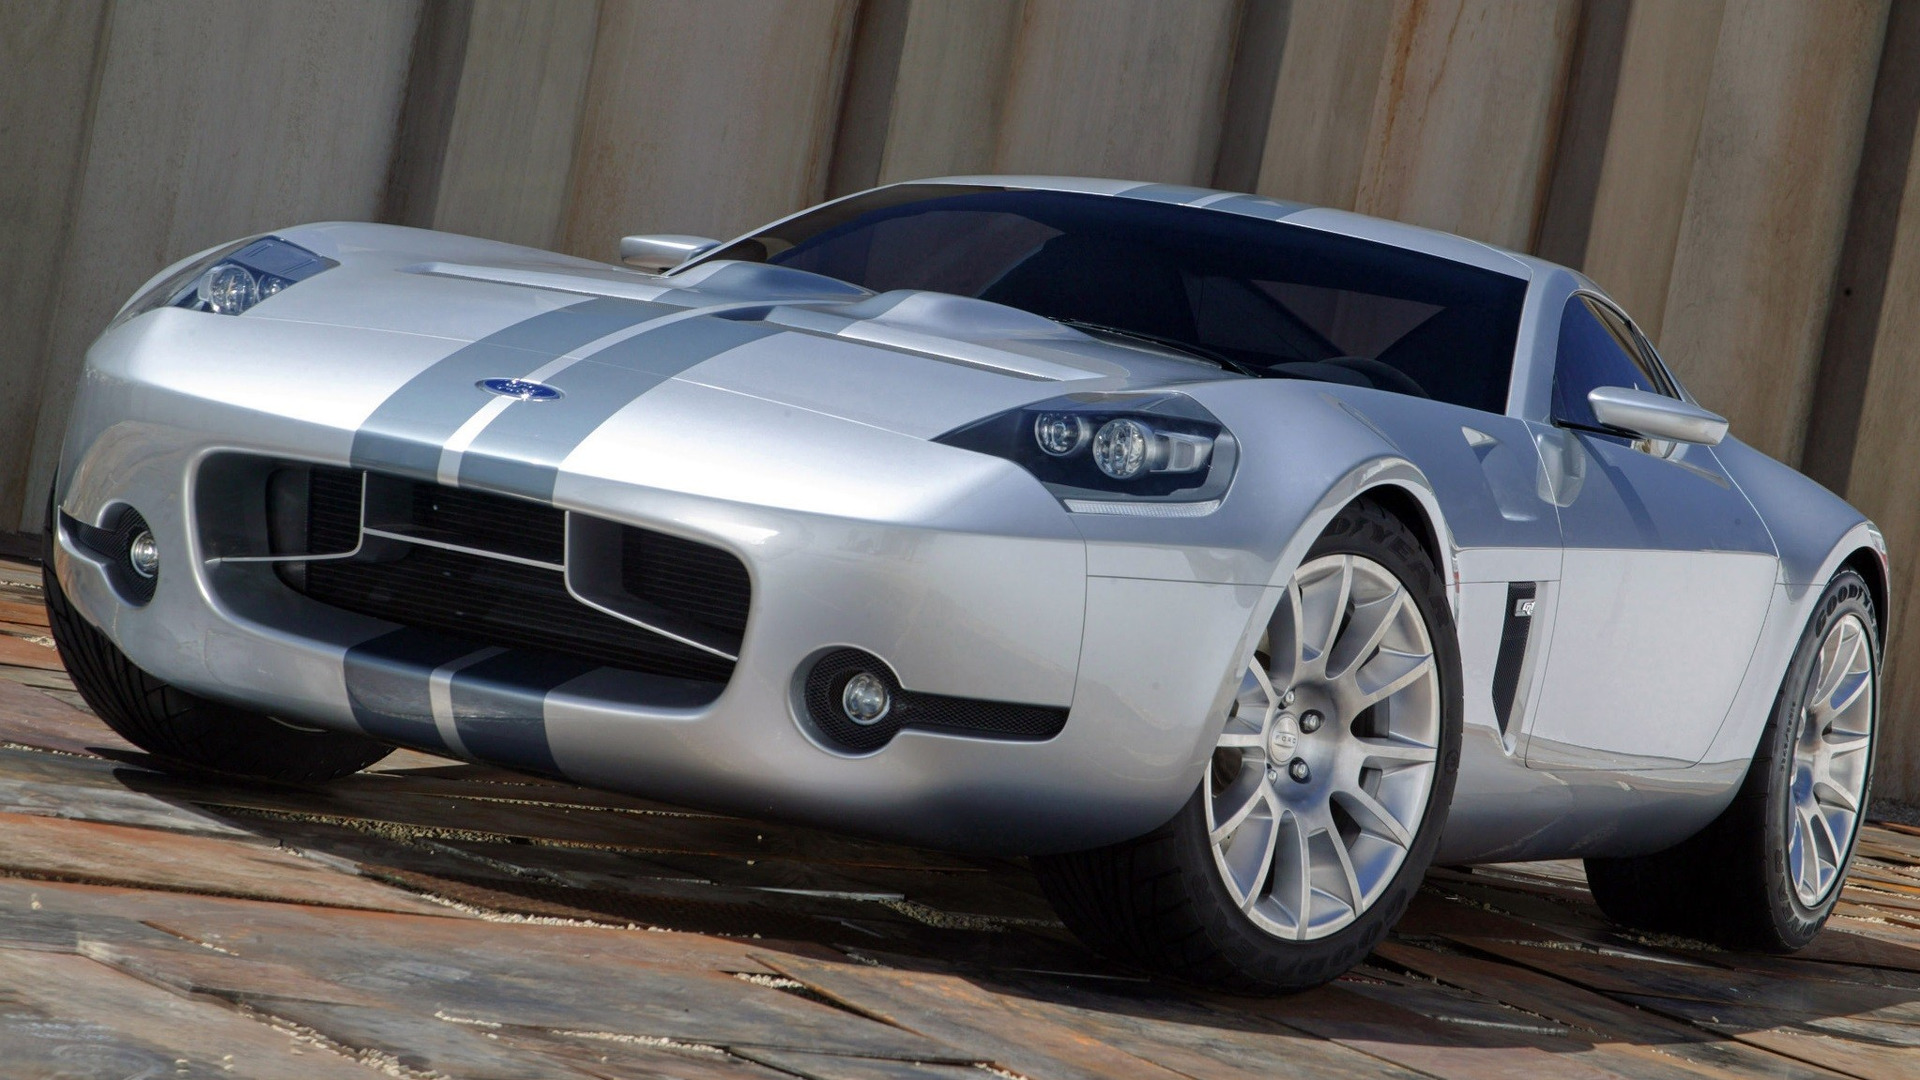 vehicles, ford shelby gr 1, car, concept car, muscle car, silver car, ford